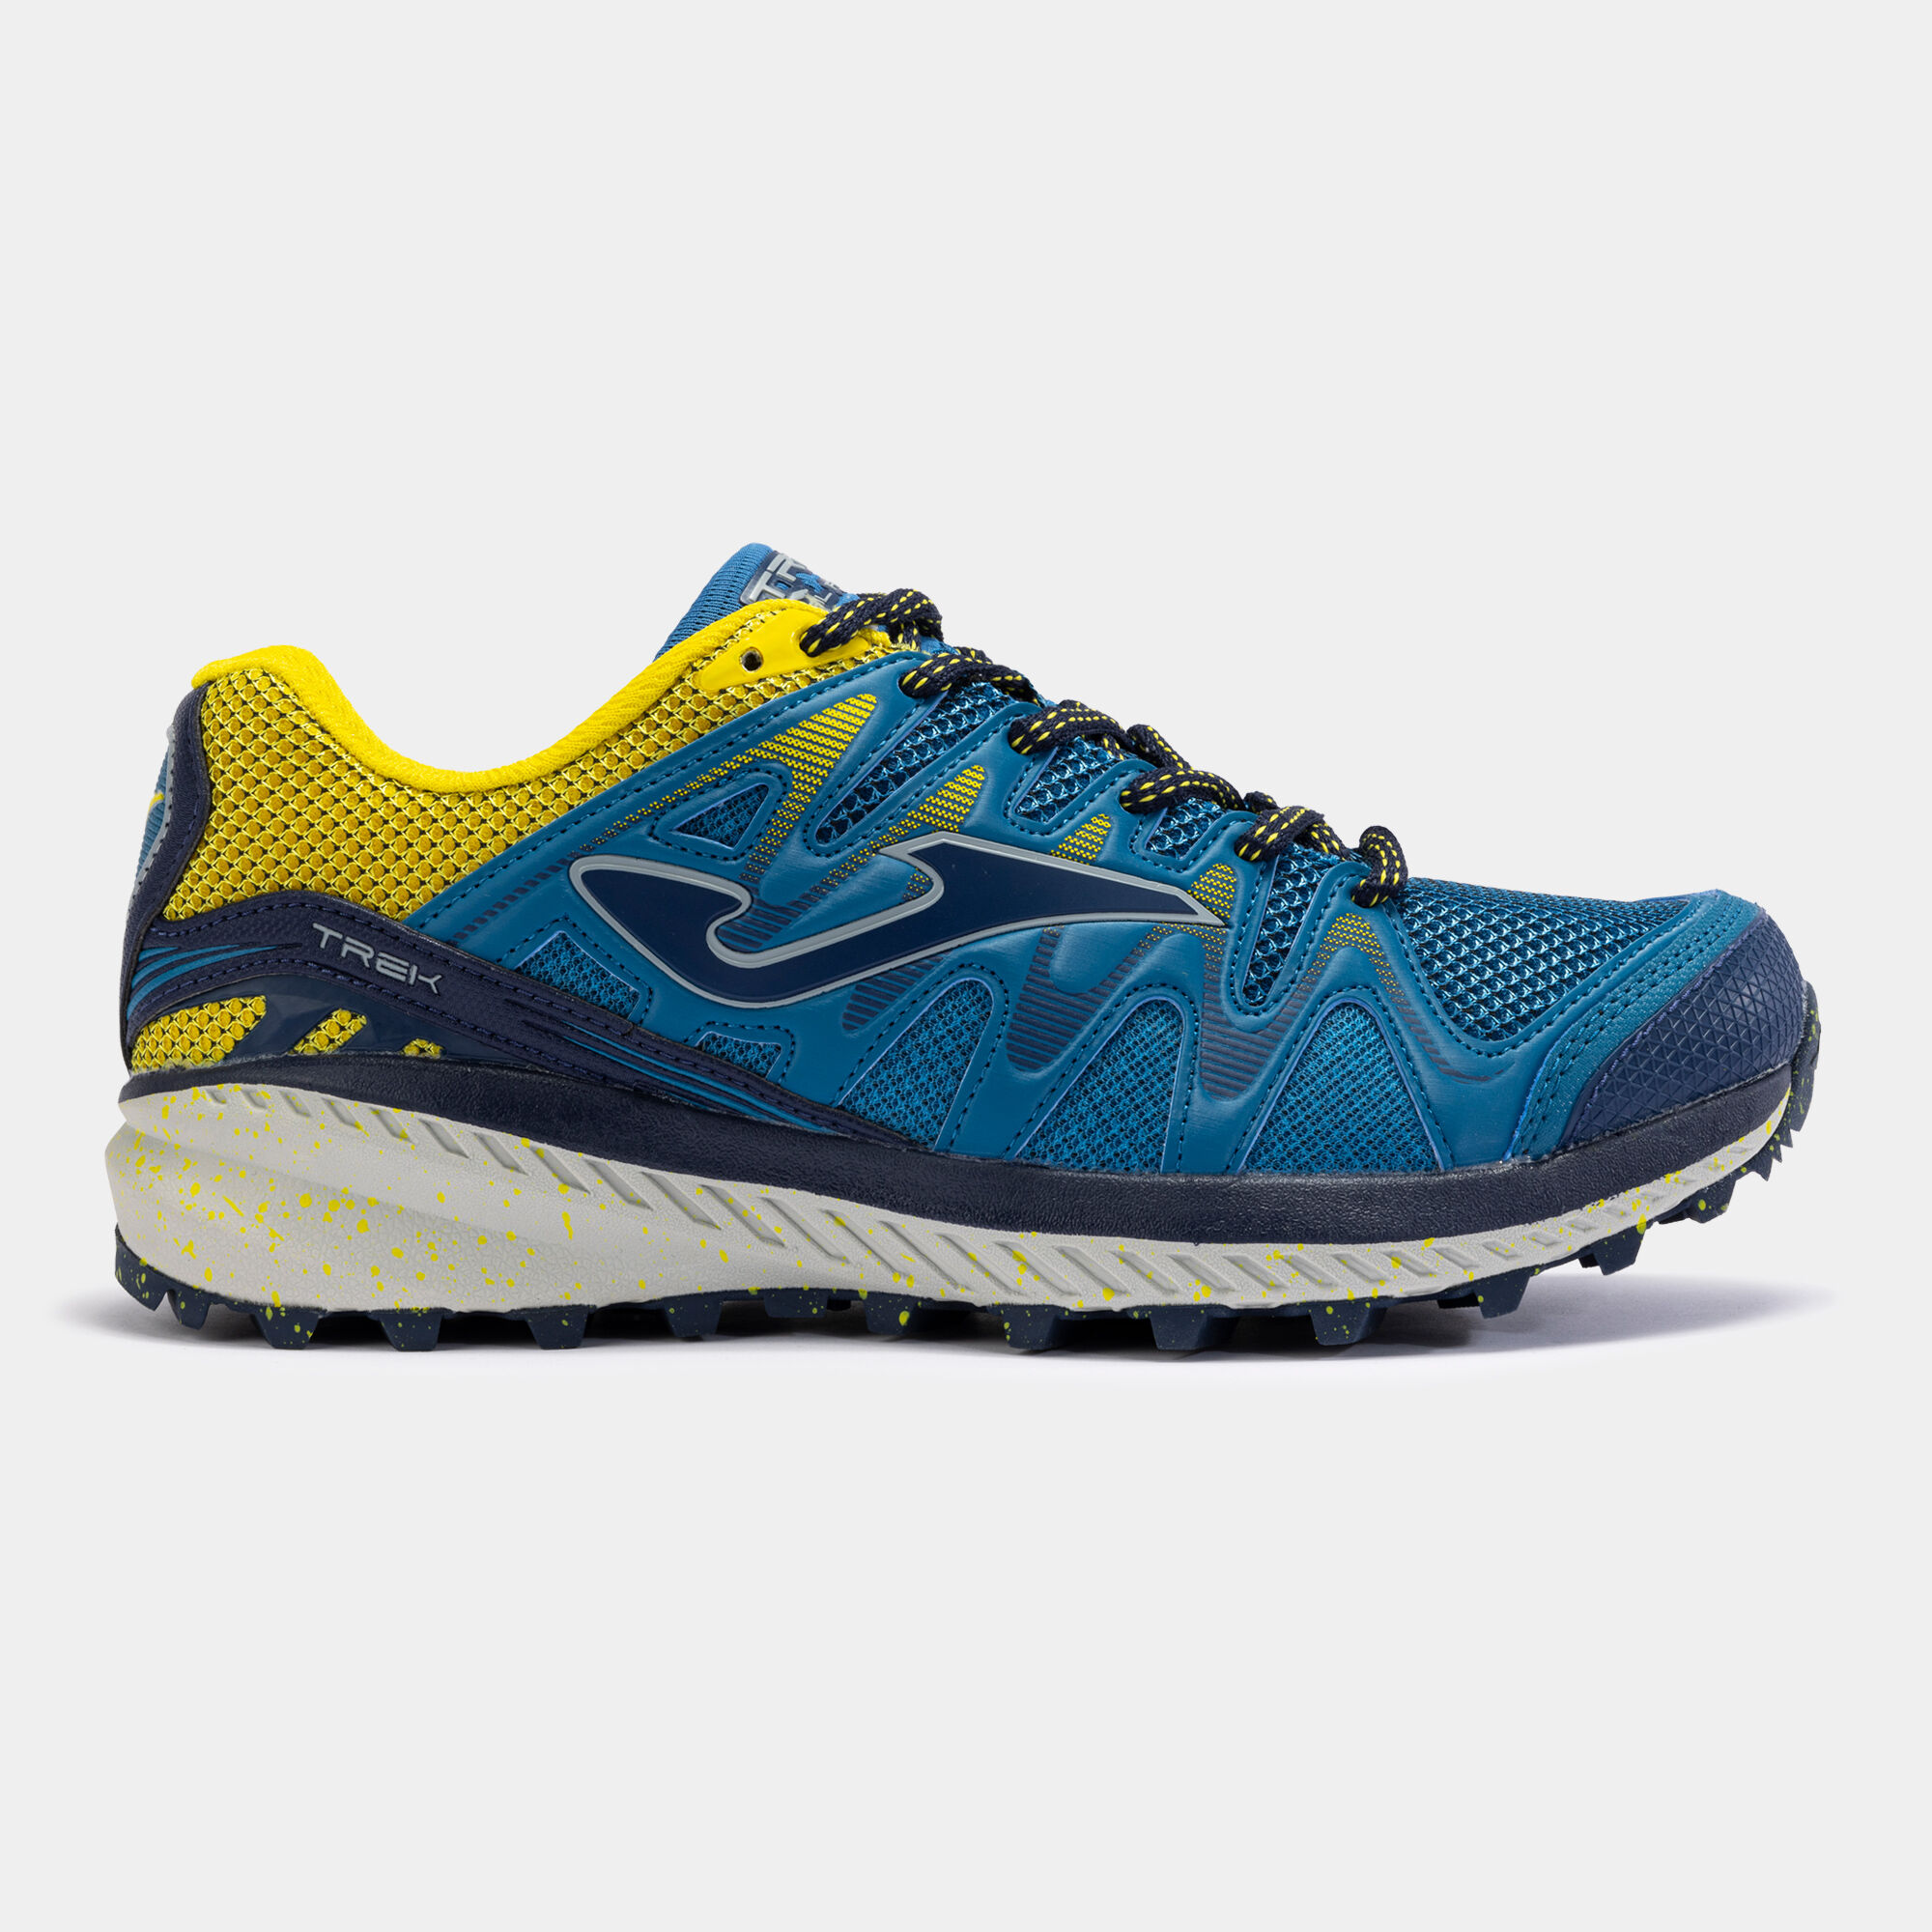 Trail-running shoes 23 man yellow |